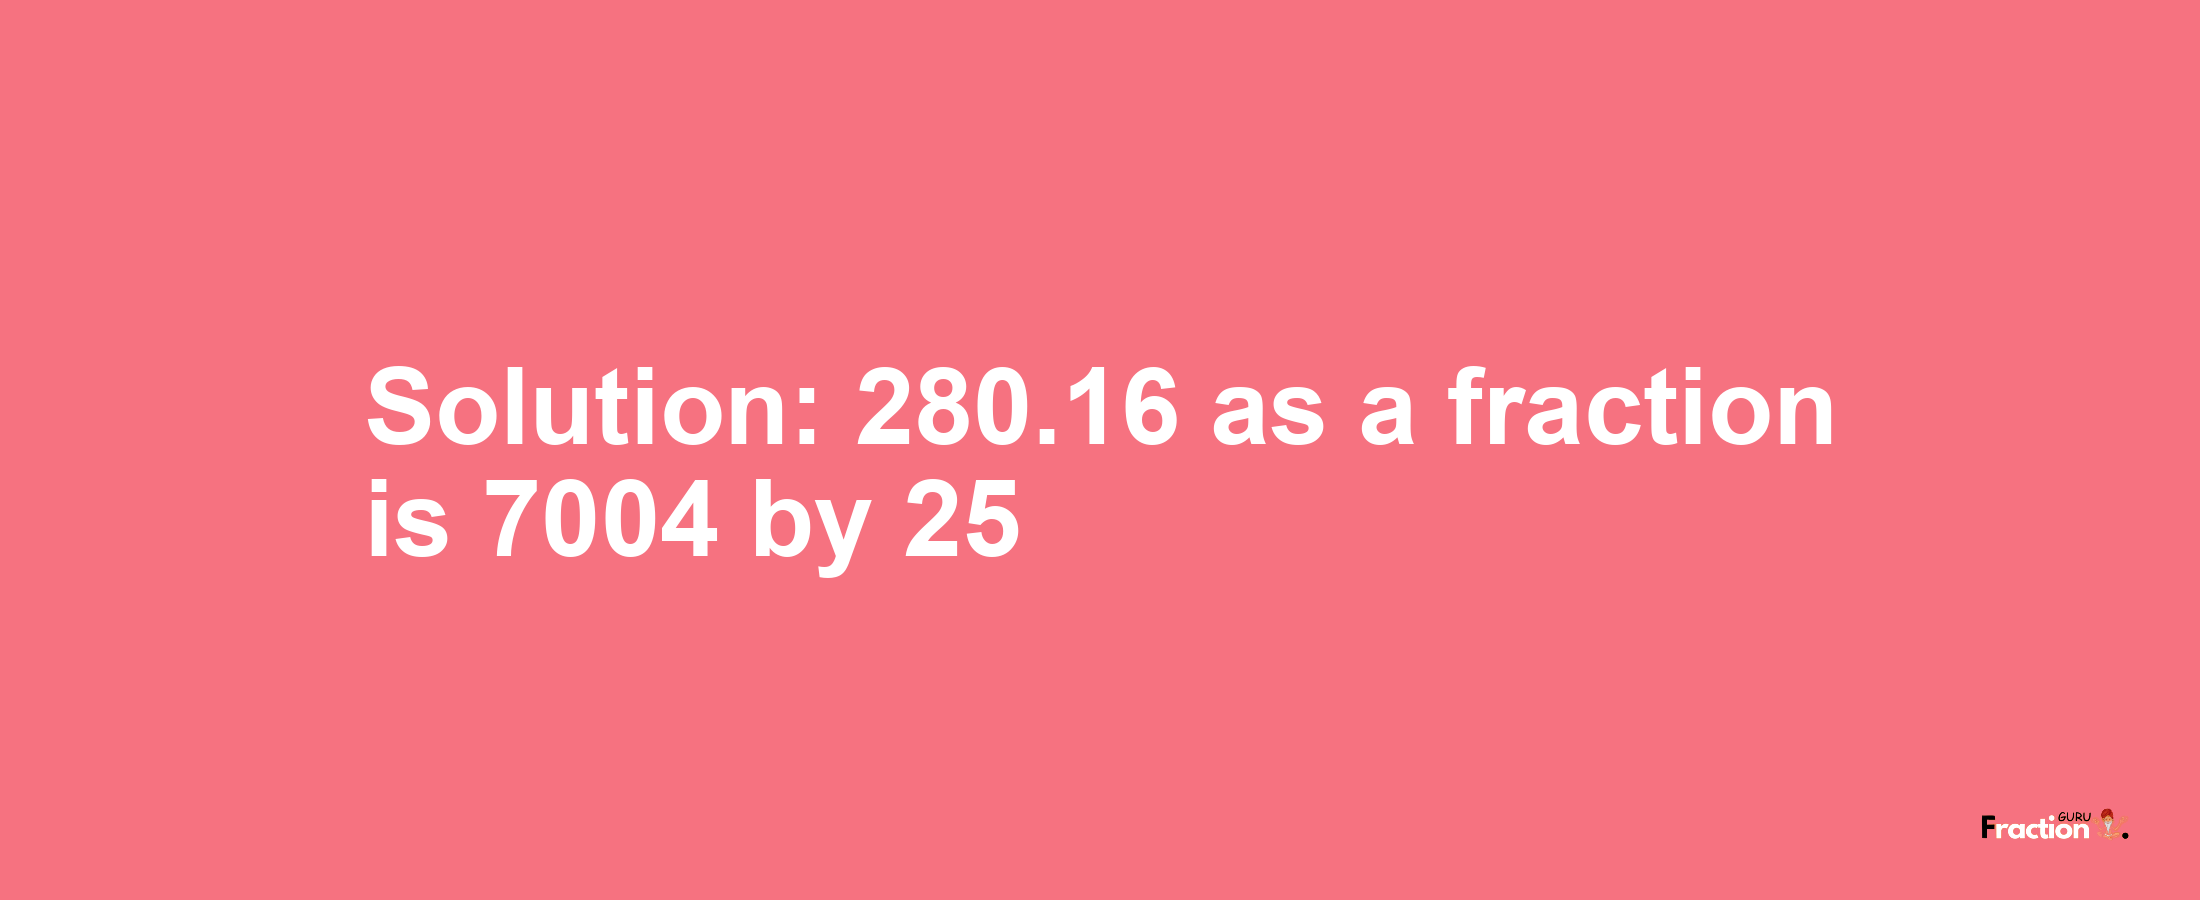 Solution:280.16 as a fraction is 7004/25